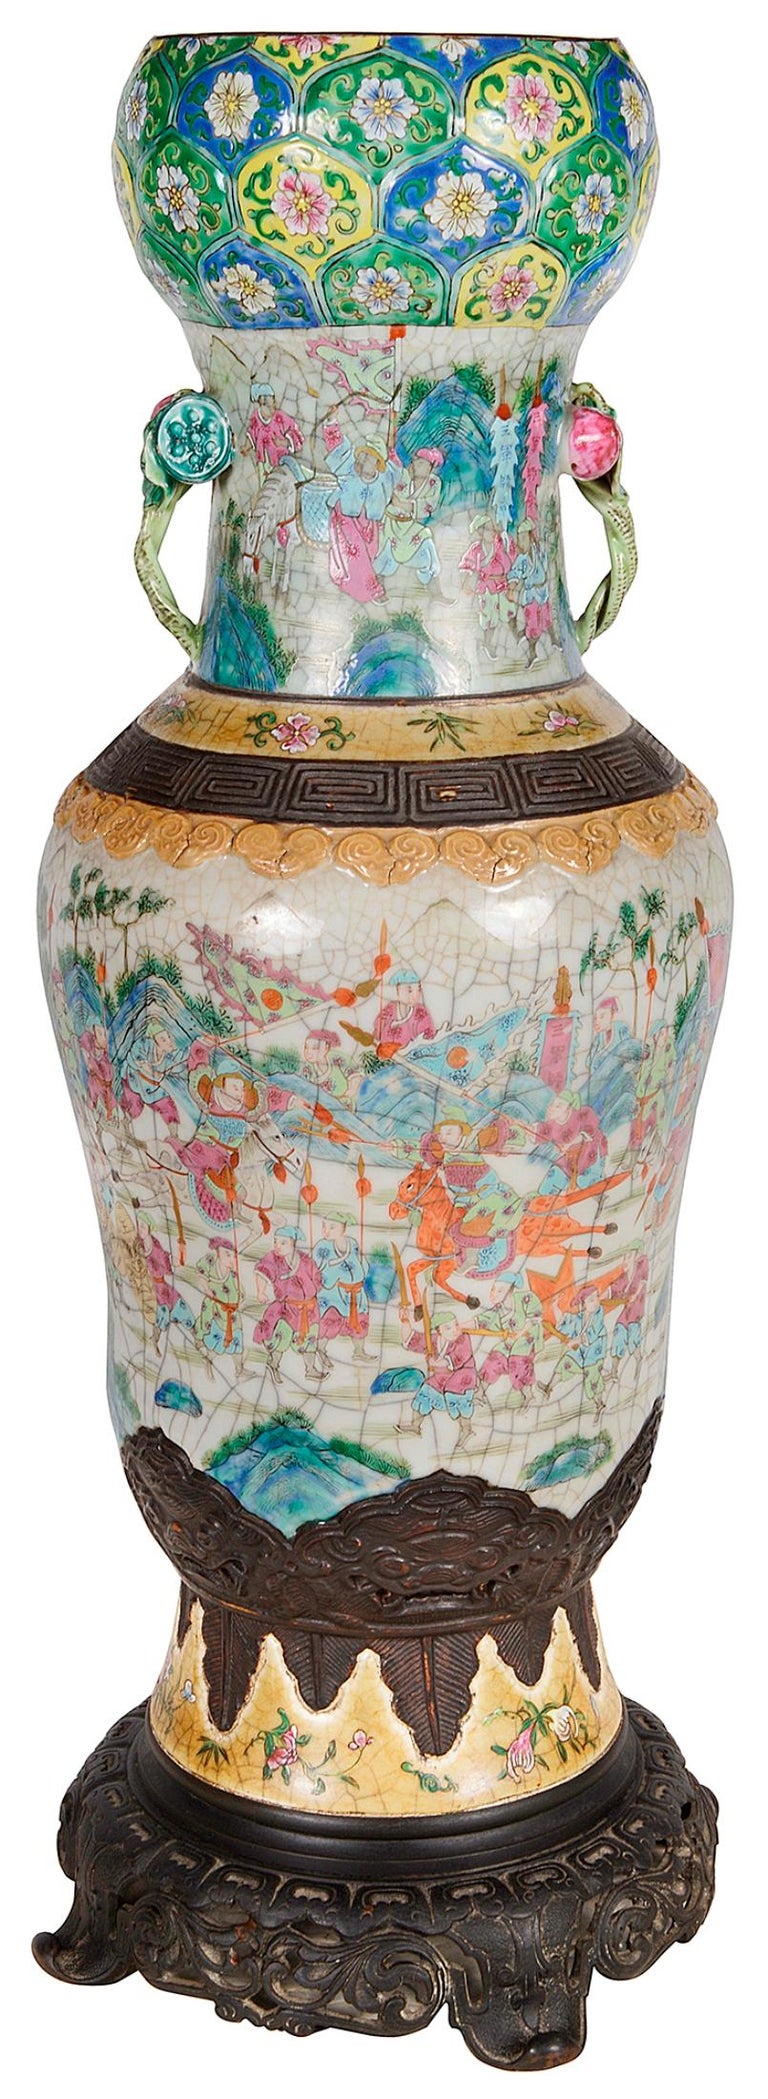 19th Century Chinese Famille Rose Crackleware Vase / Lamp For Sale 4